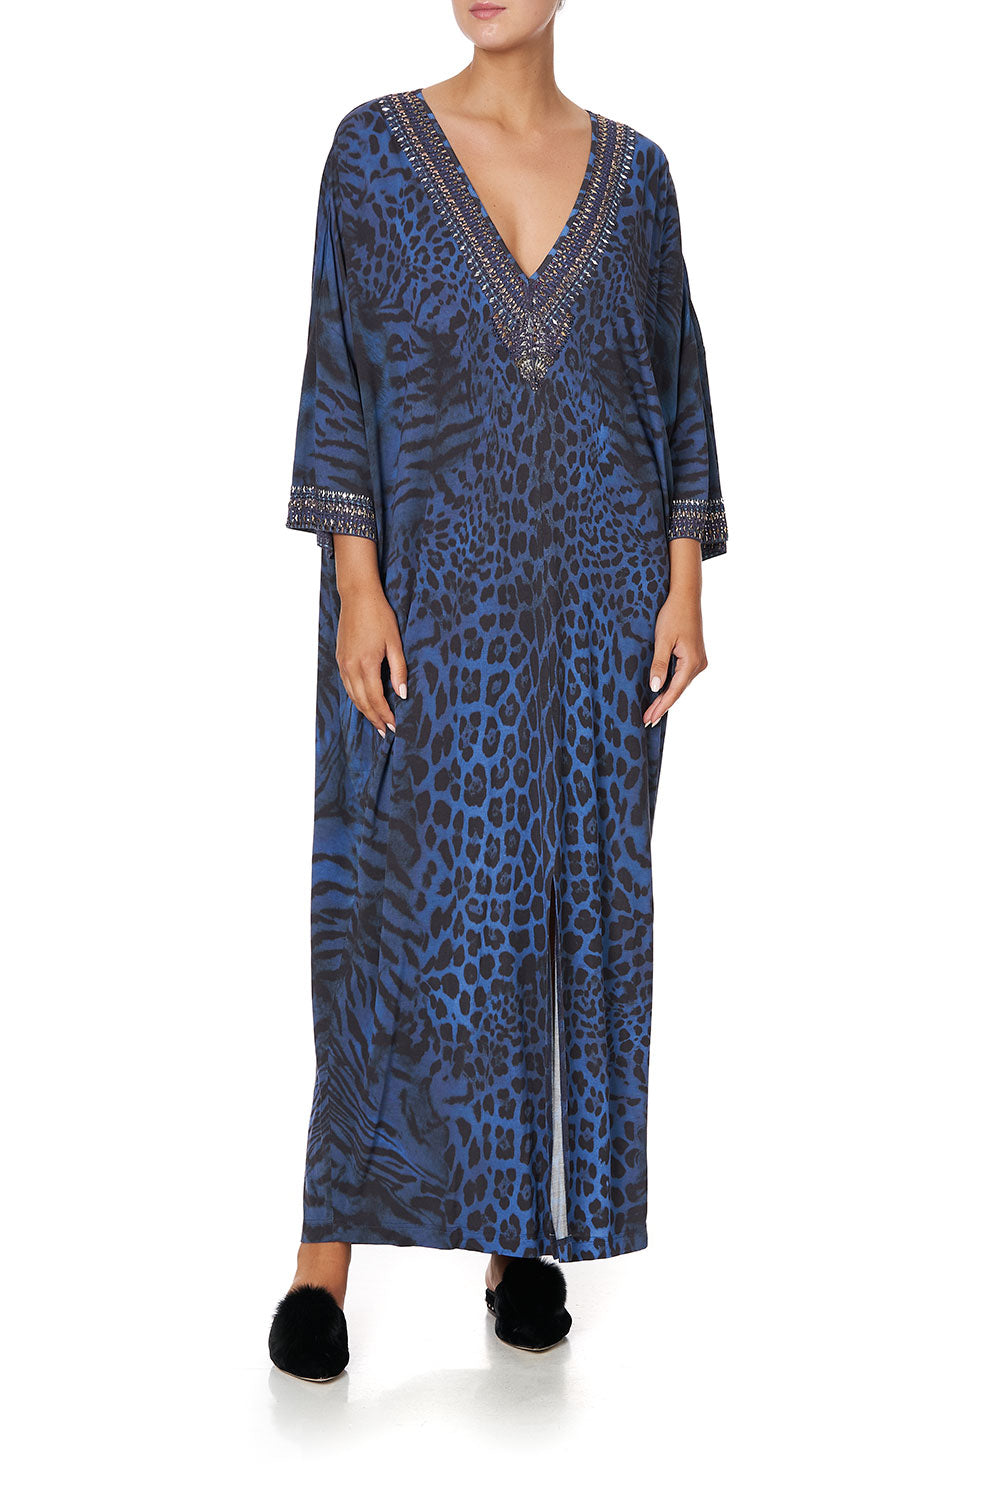 JERSEY V-NECK BATWING KAFTAN THE CATS MEOW